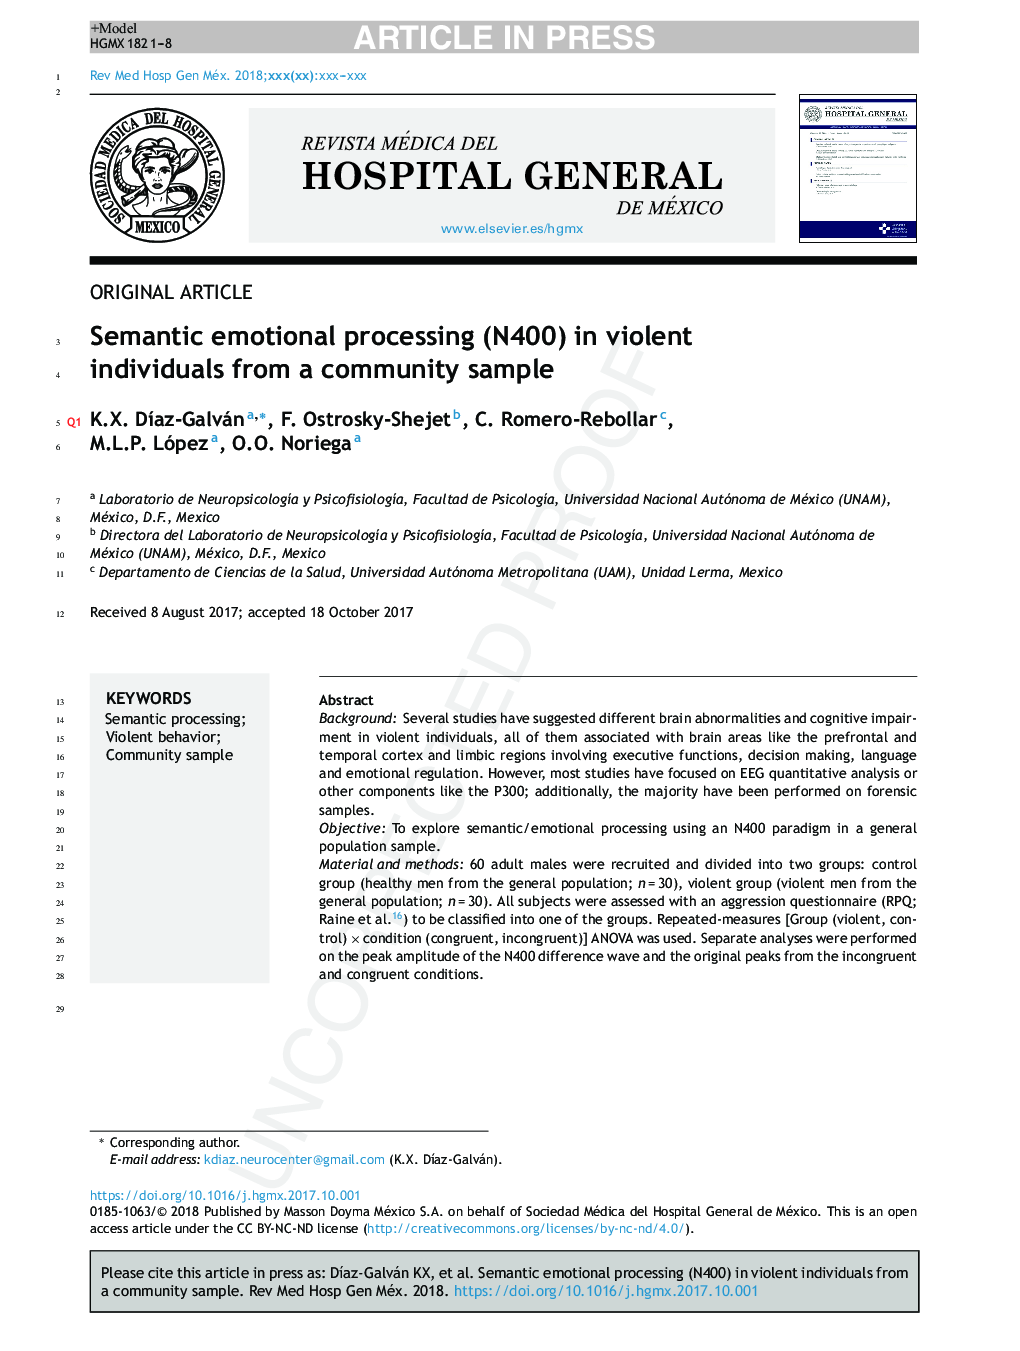 Semantic emotional processing (N400) in violent individuals from a community sample